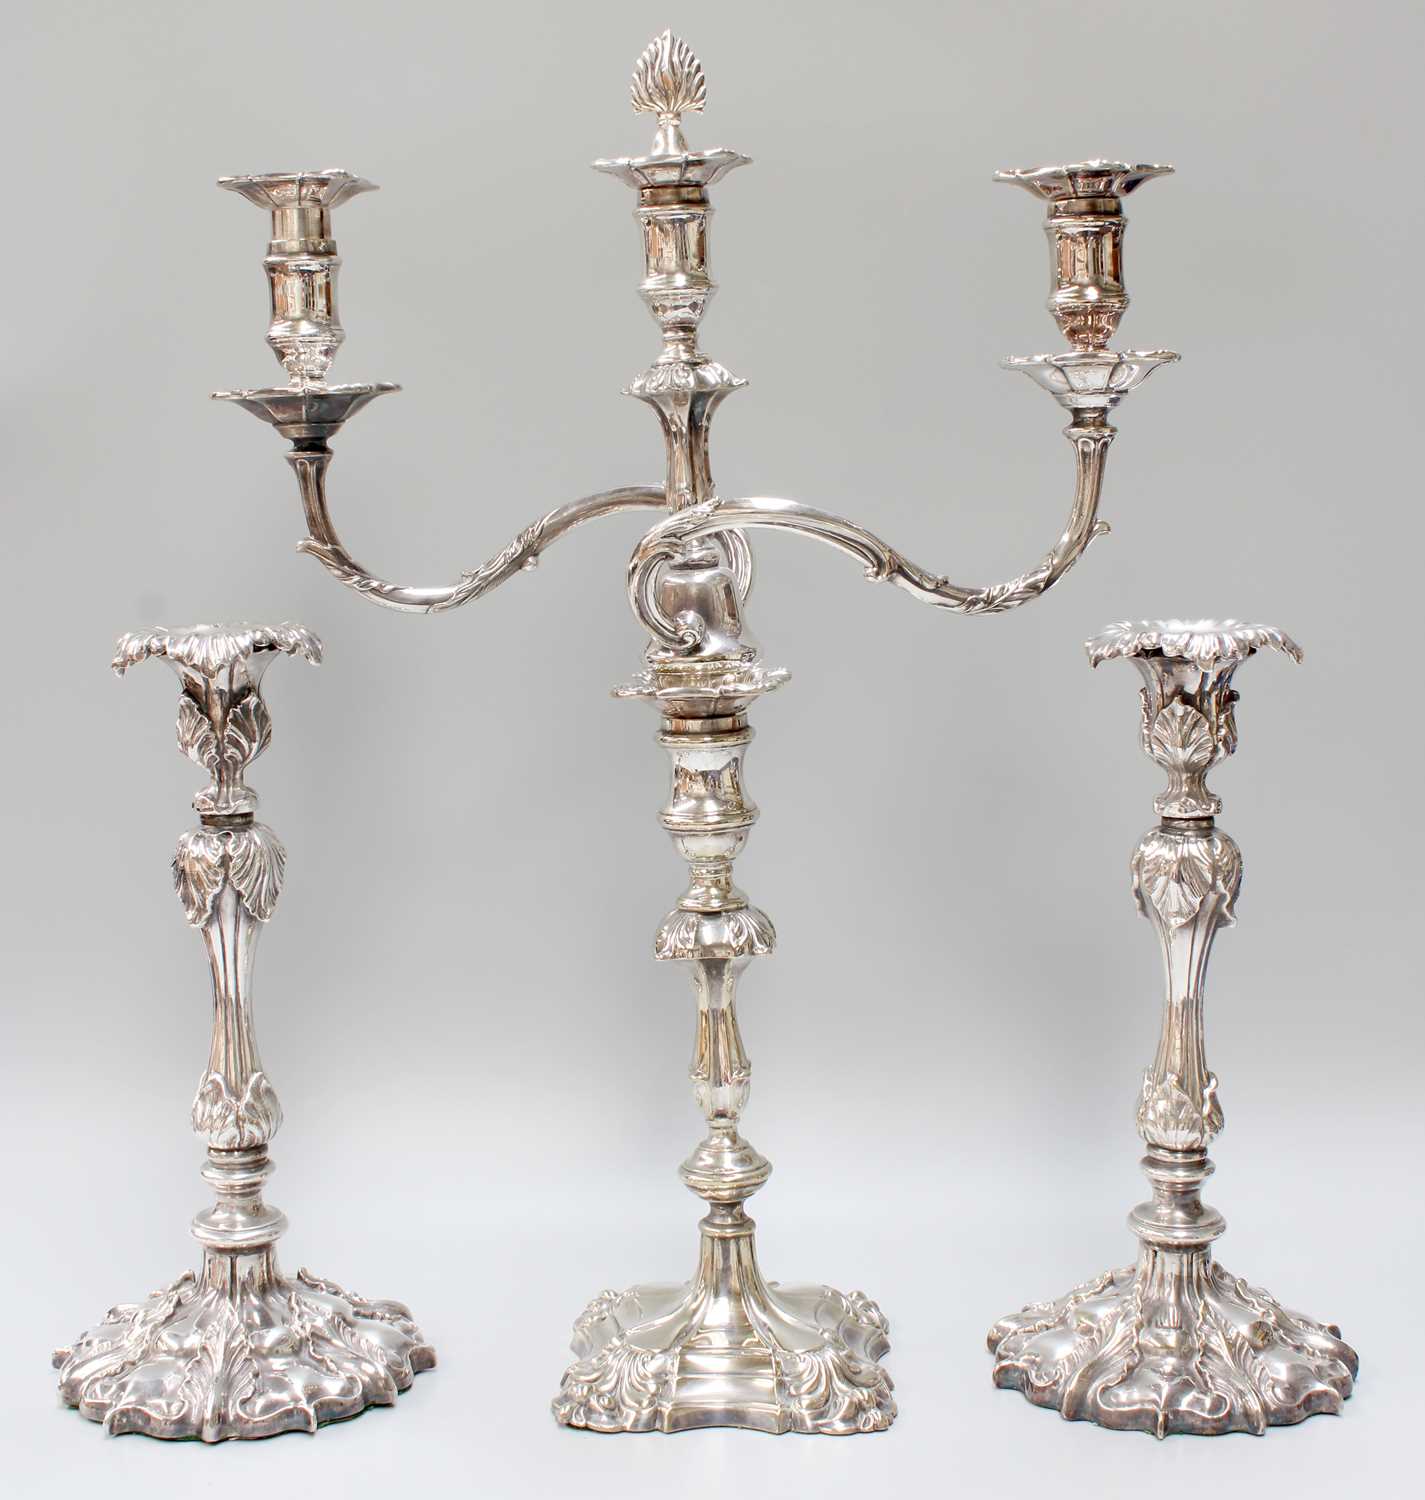 A Pair of Victorian Silver Plate Candlesticks, by Elkington and Co., Second Half 19th Century,